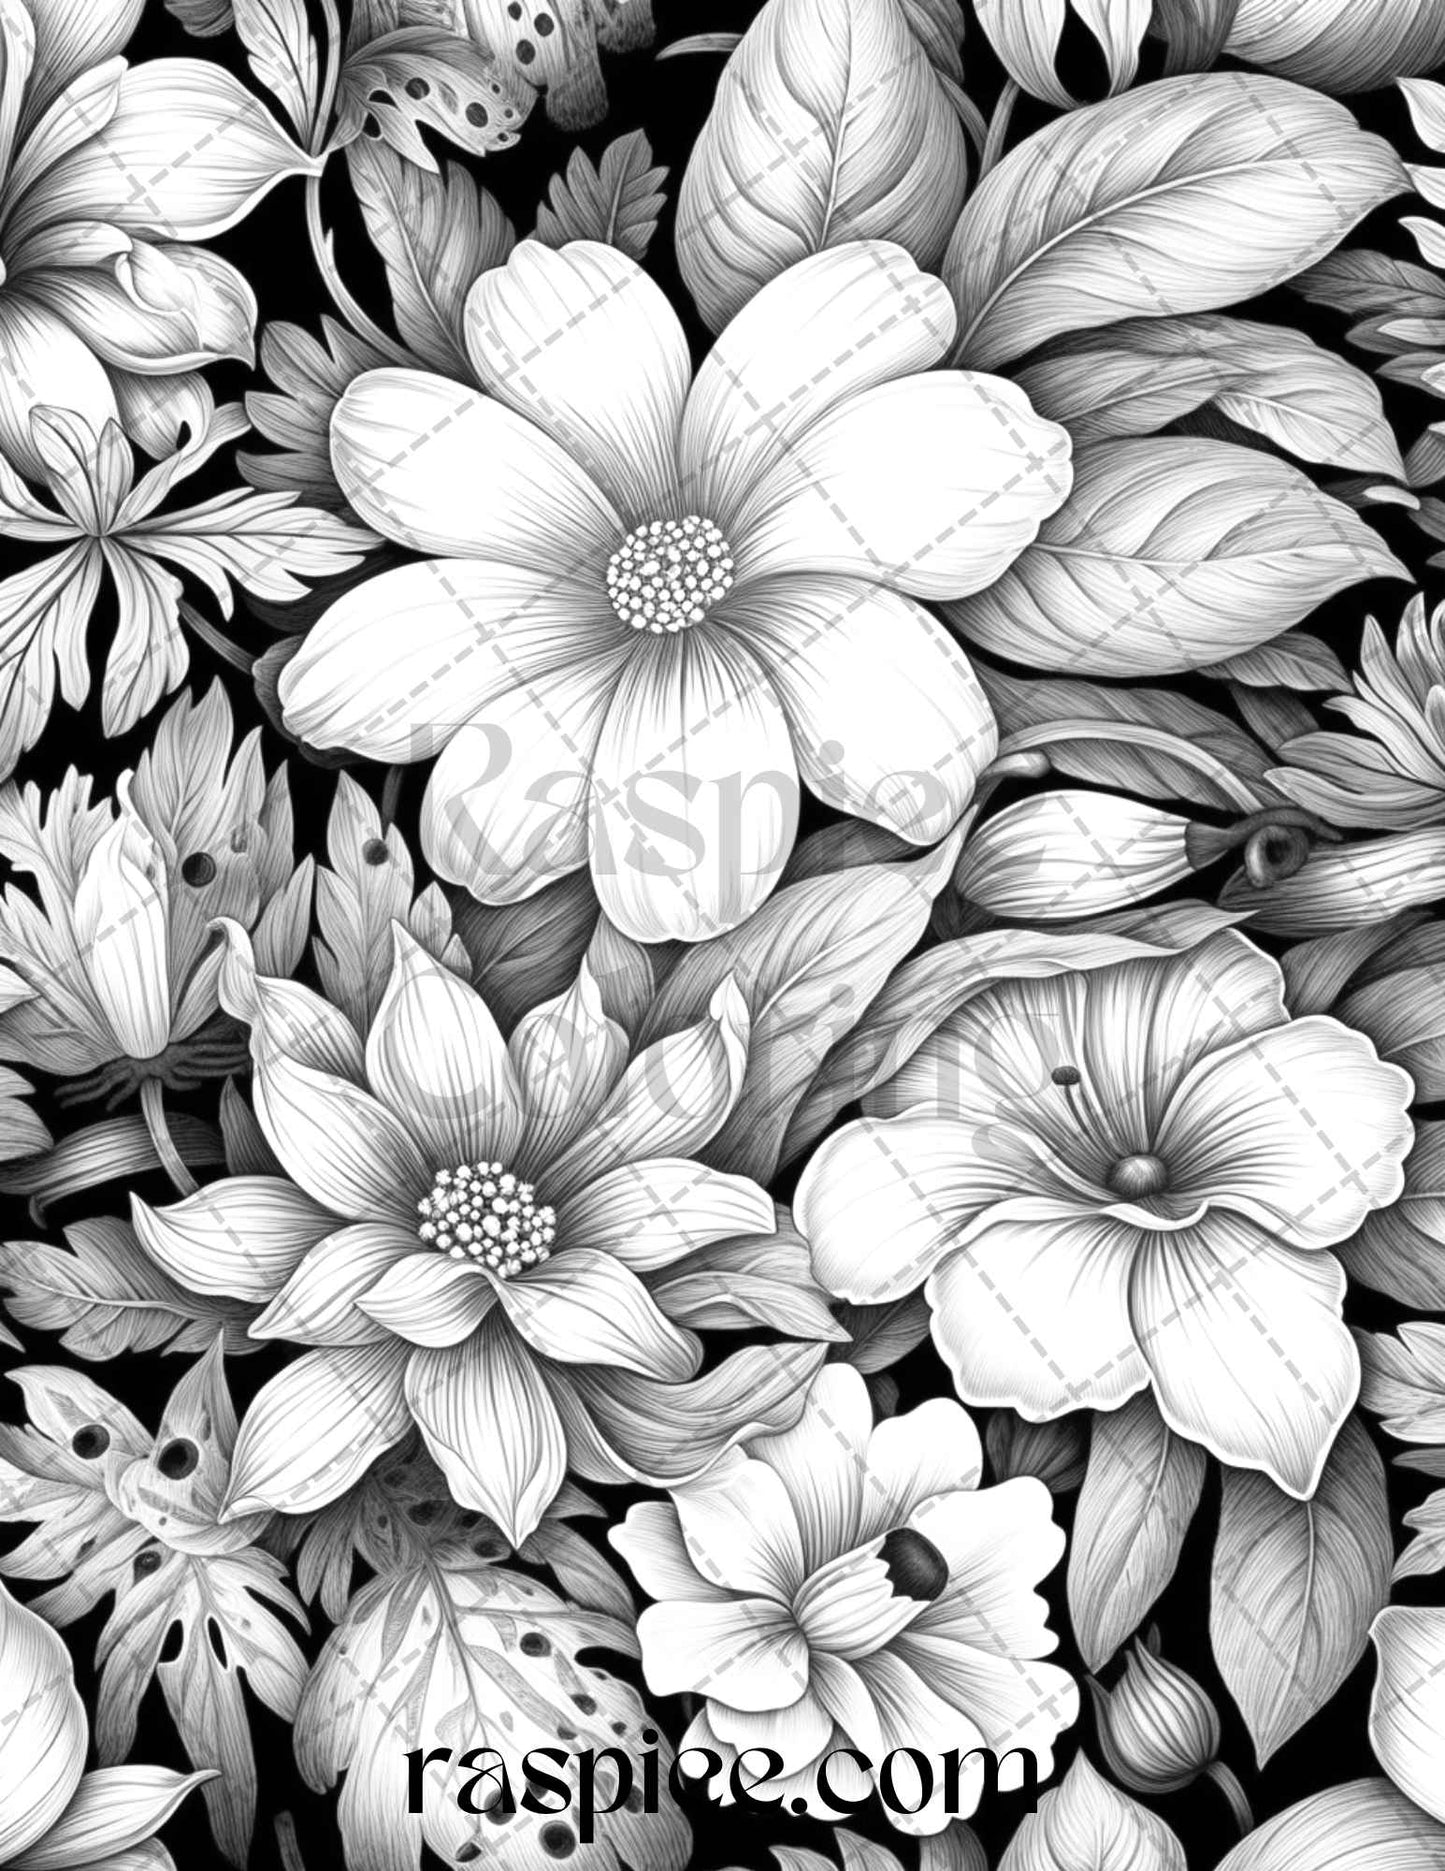 Vintage Floral Patterns Grayscale Coloring Pages, Printable Grayscale Coloring Pages for Adults, Vintage Floral Grayscale Art for Coloring, Adult Coloring, Pages with Vintage Patterns, Grayscale Coloring Sheets for Adults